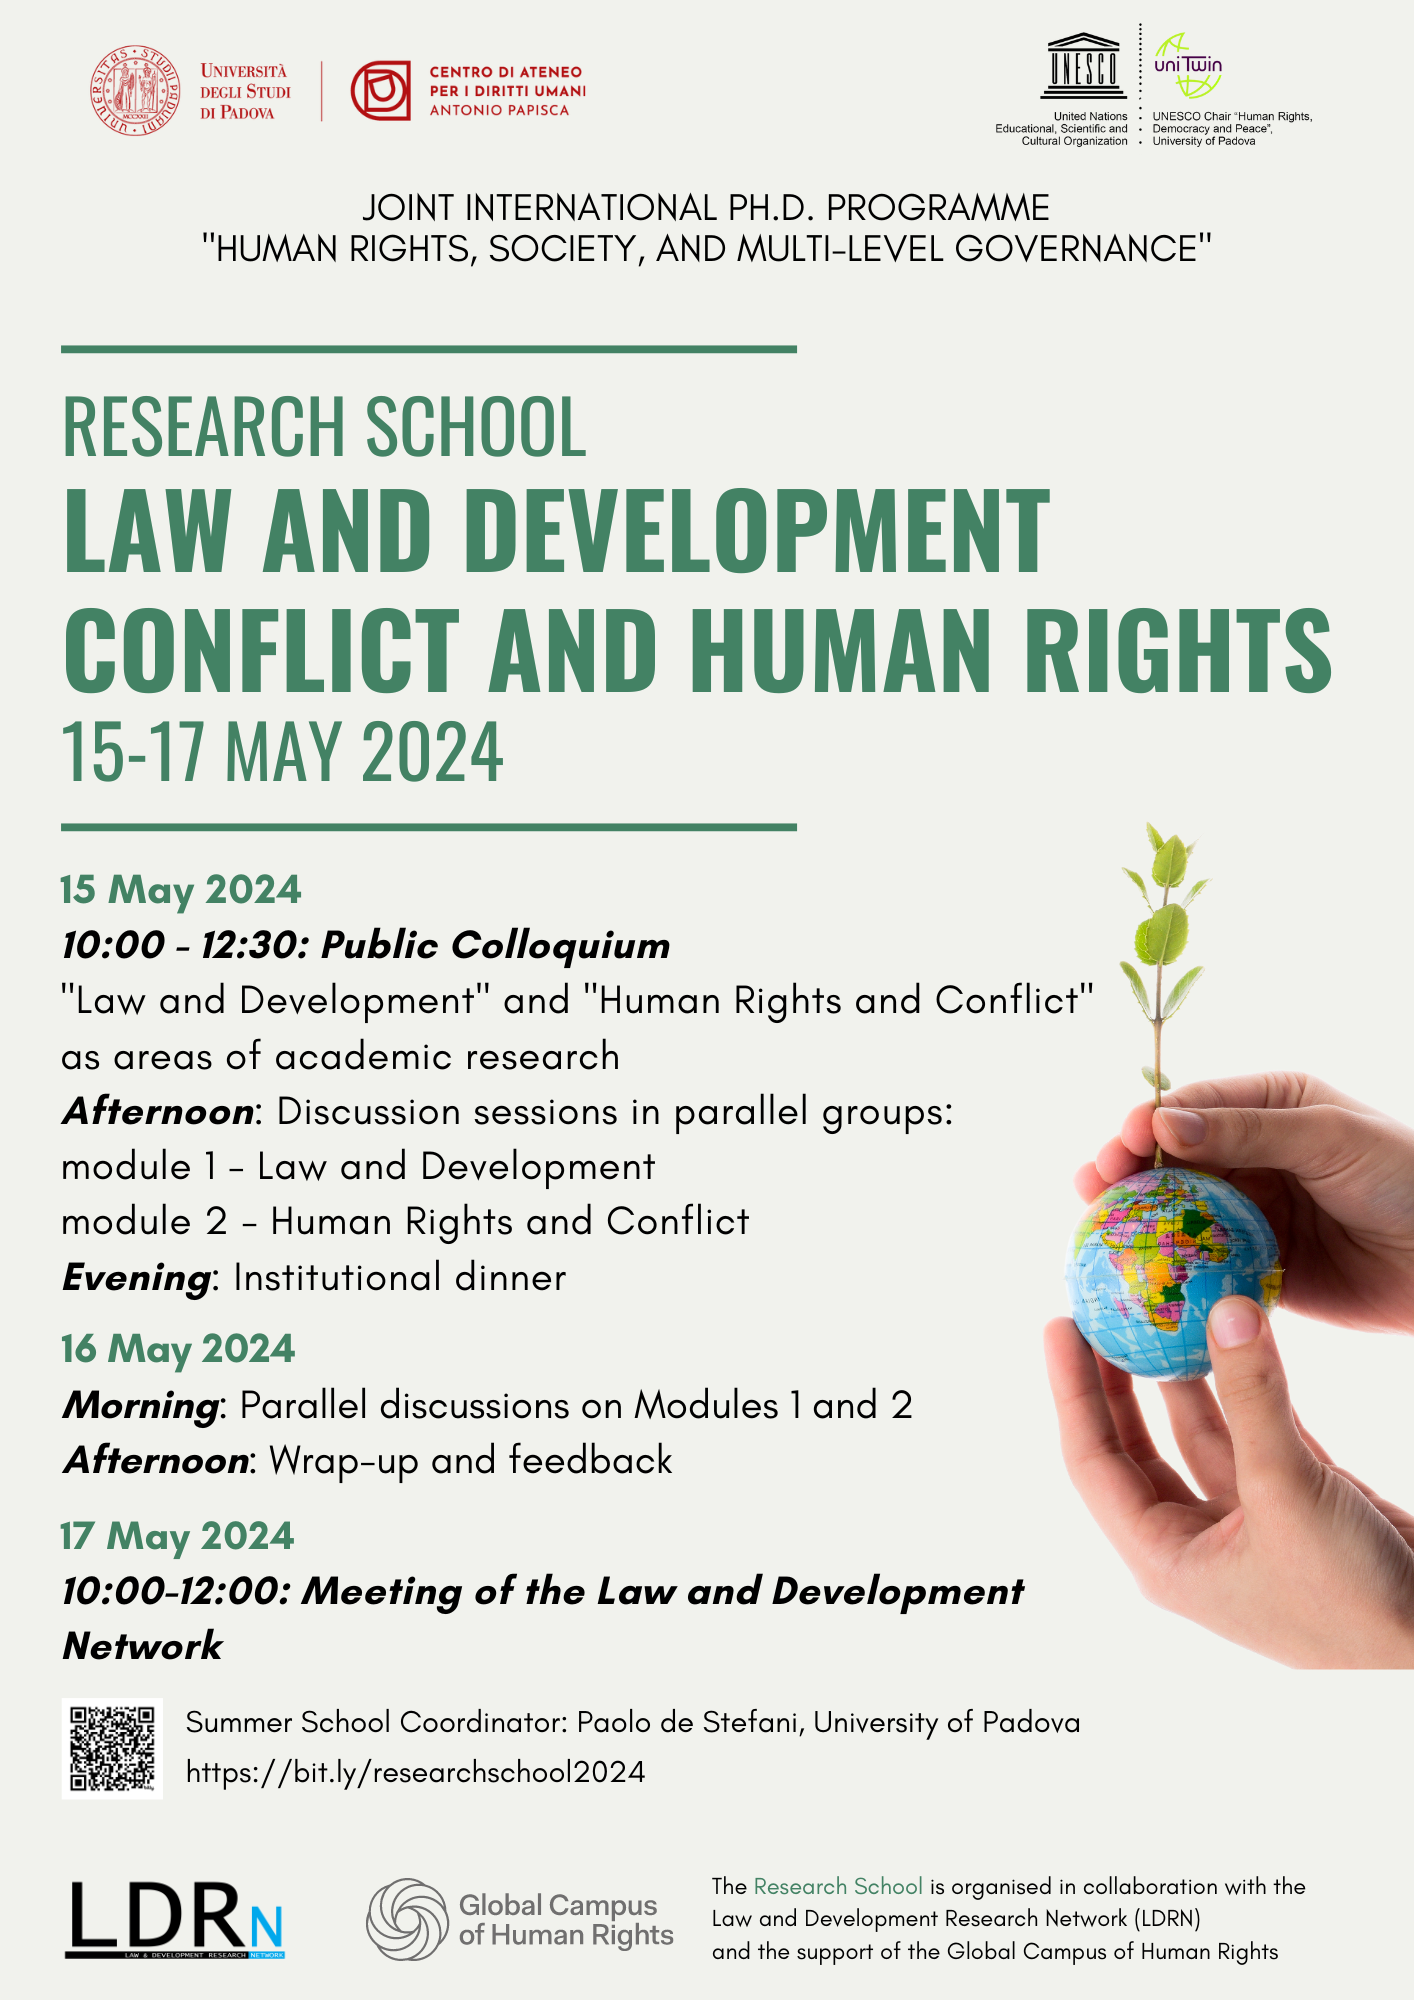 Research School, Law and Development / Conflict and Human Rights, 15-17 may 2024